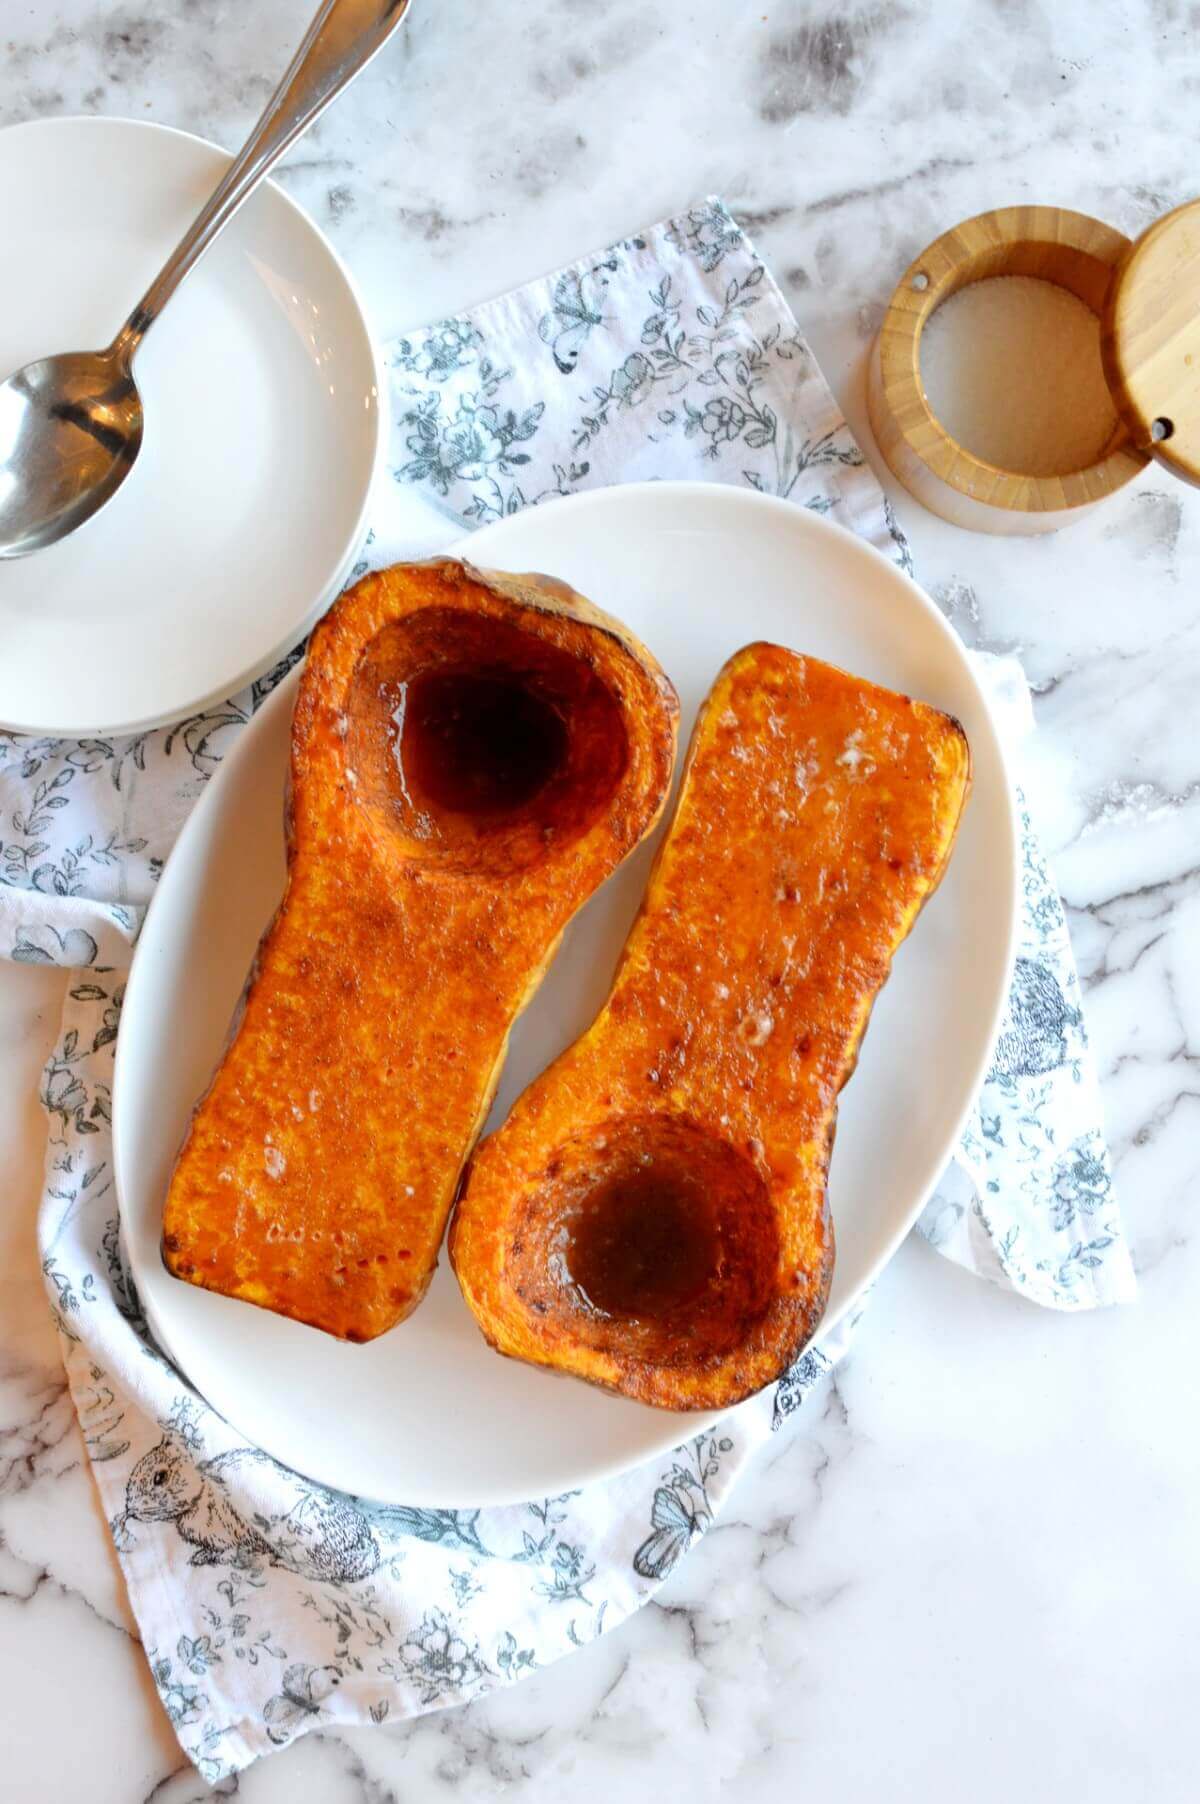 Two butternut squash halves on a plate that are roasted with brown sugar